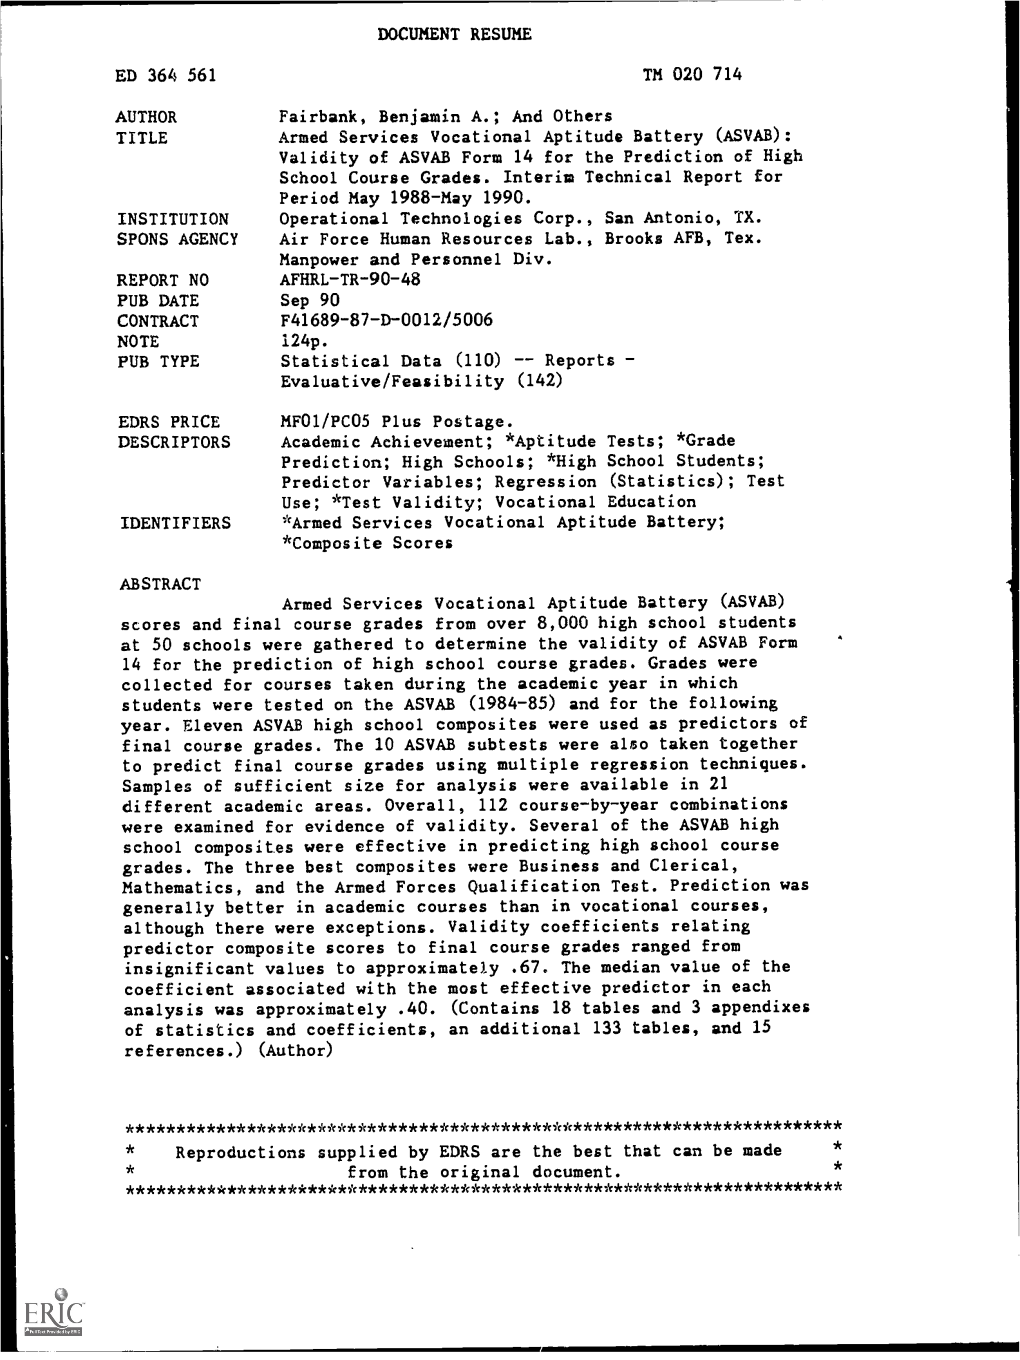 Armed Services Vocational Aptitude Battery (ASVAB): Validity of ASVAB Form 14 for the Prediction of High School Course Grades. Interim Technical Report for Period May 1988-May